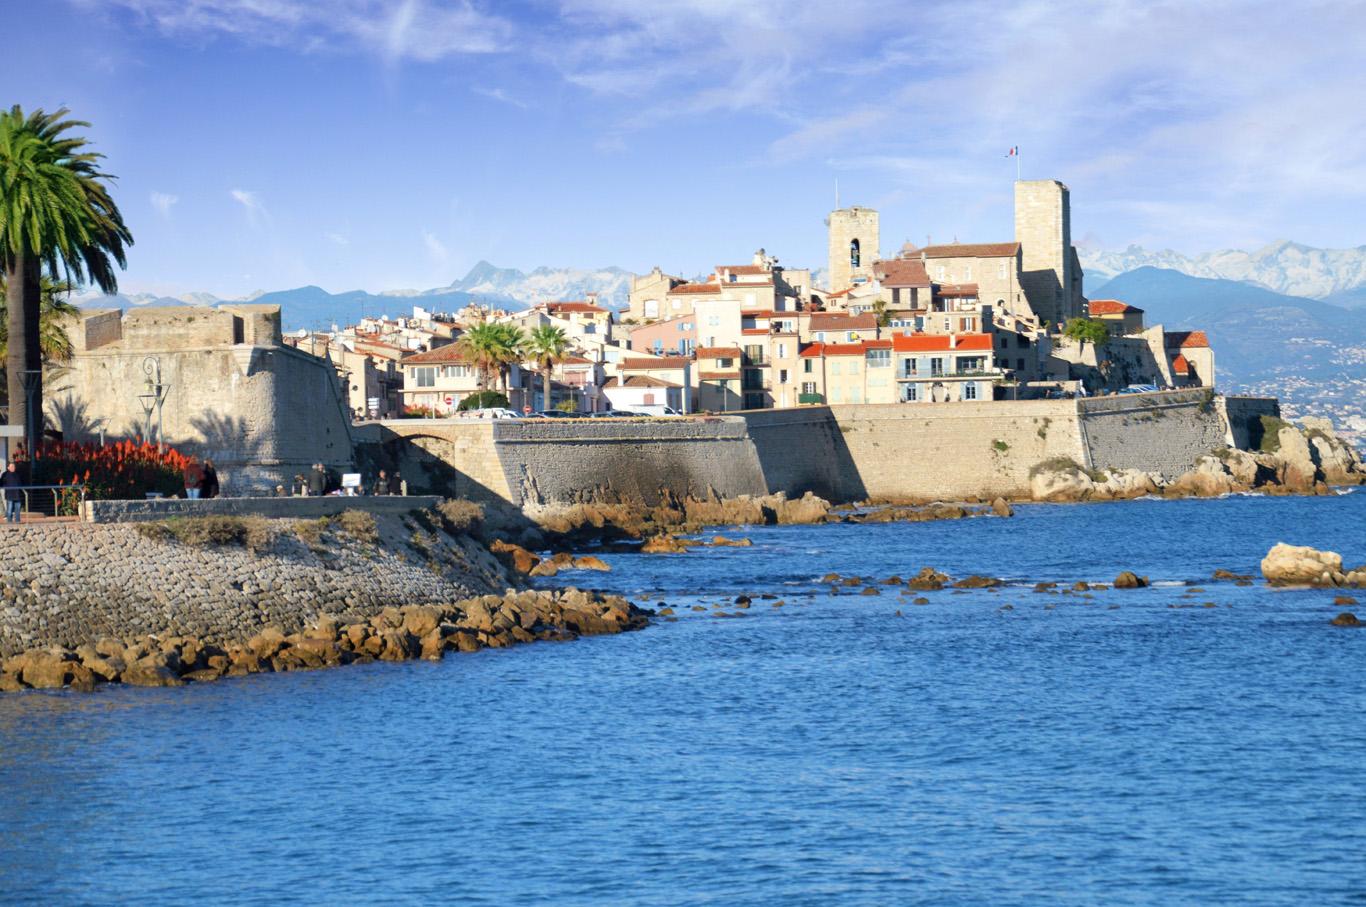 Beautiful desktop wallpaper featuring a view of Antibes in French Riviera